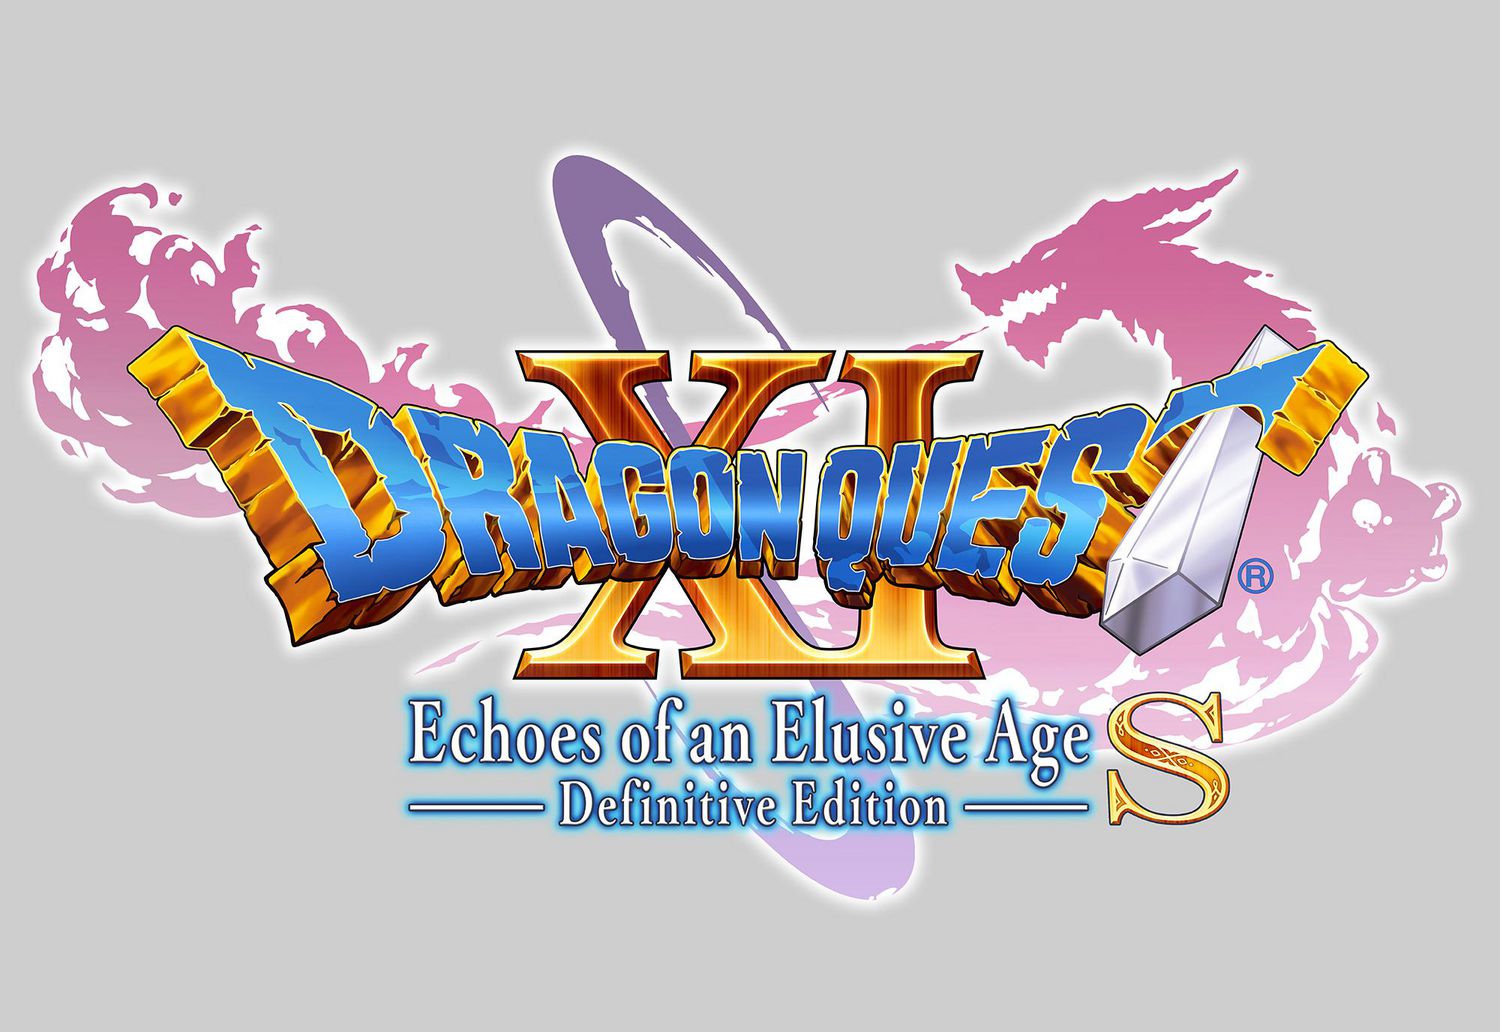 dragon quest xi switch code